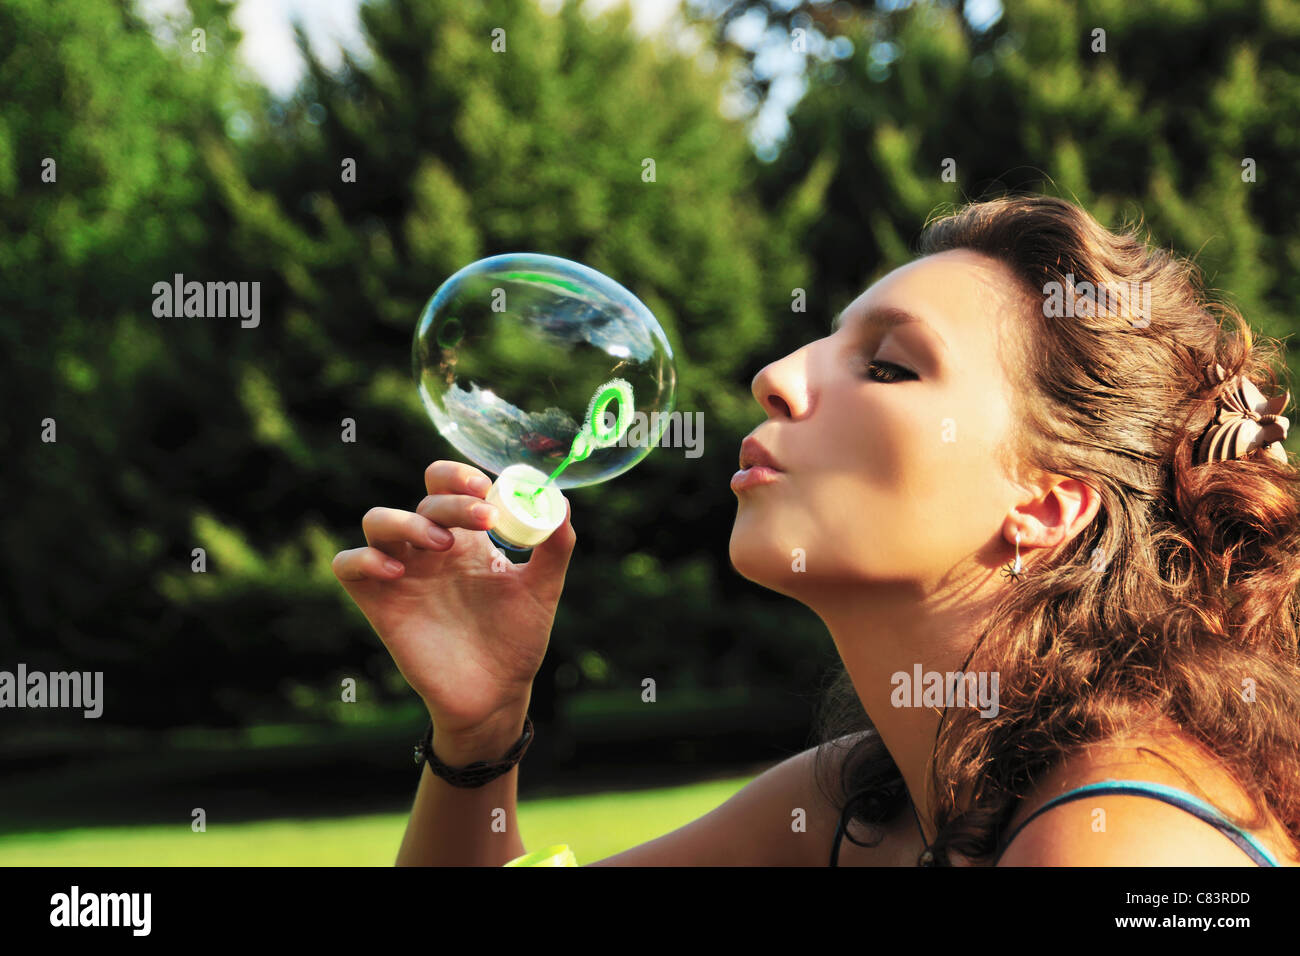 Woman blowing bubbles in park Stock Photo